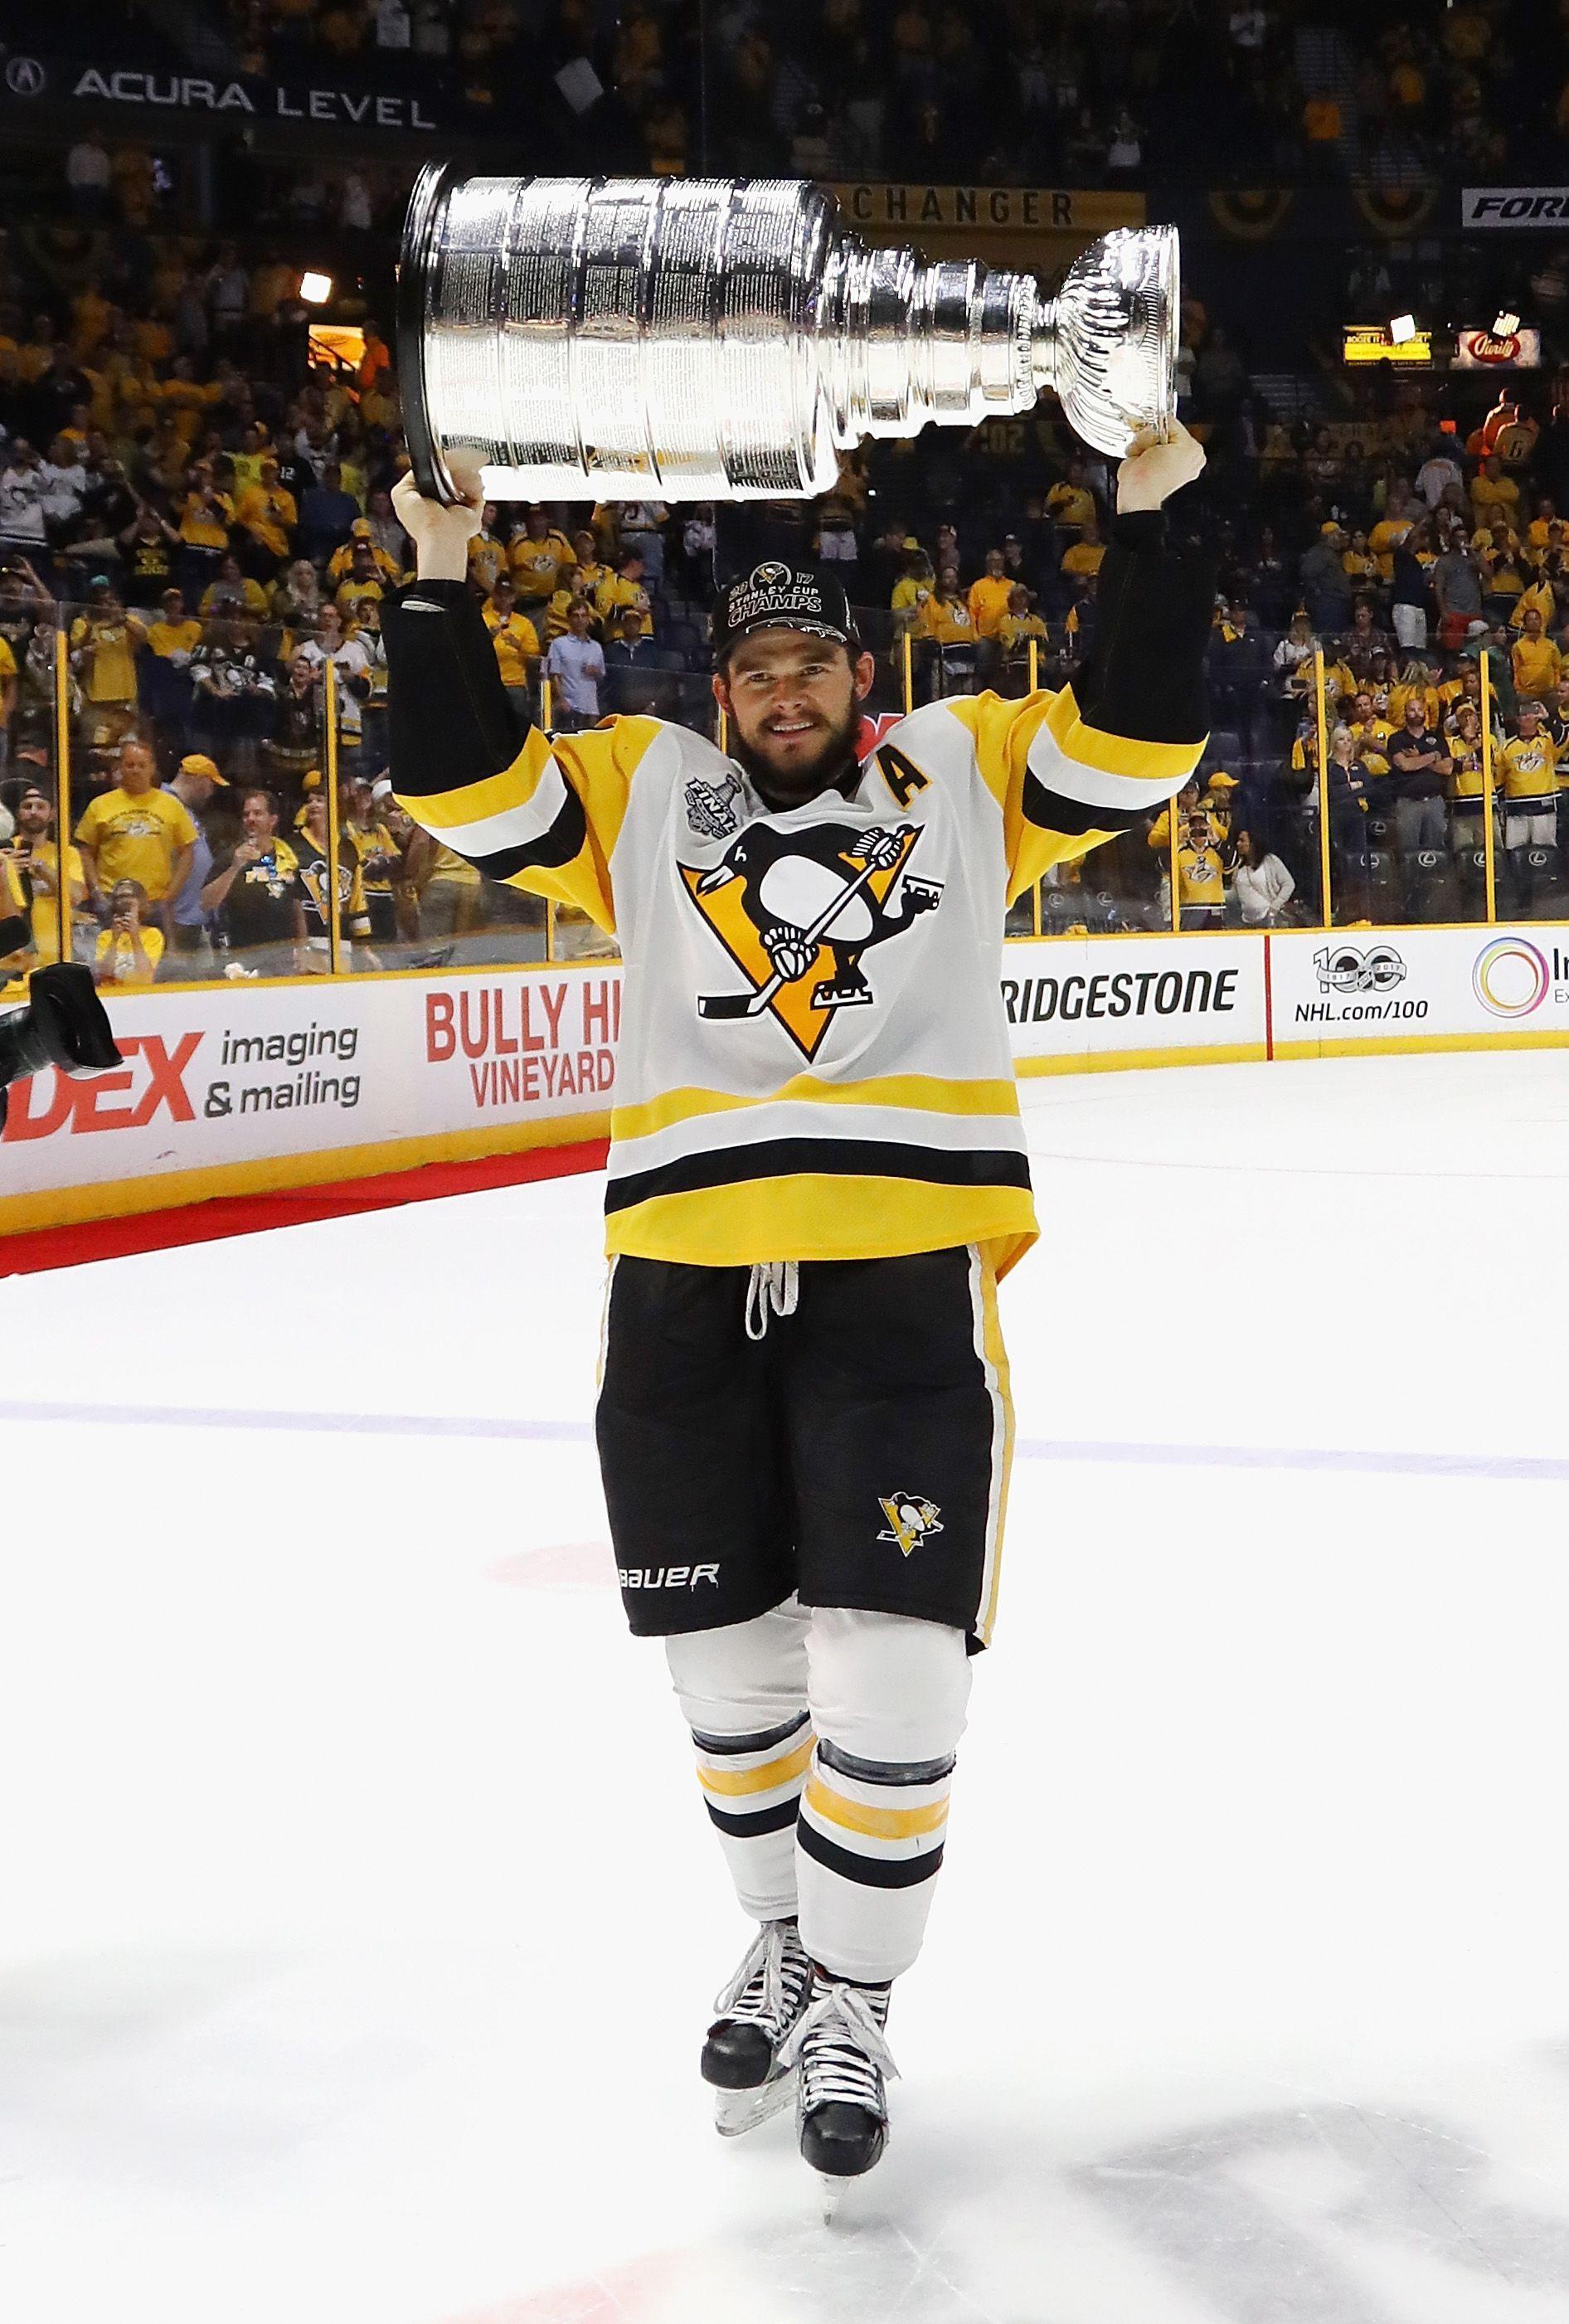 Stanley Cup Champion Kunitz. He finished the playoffs